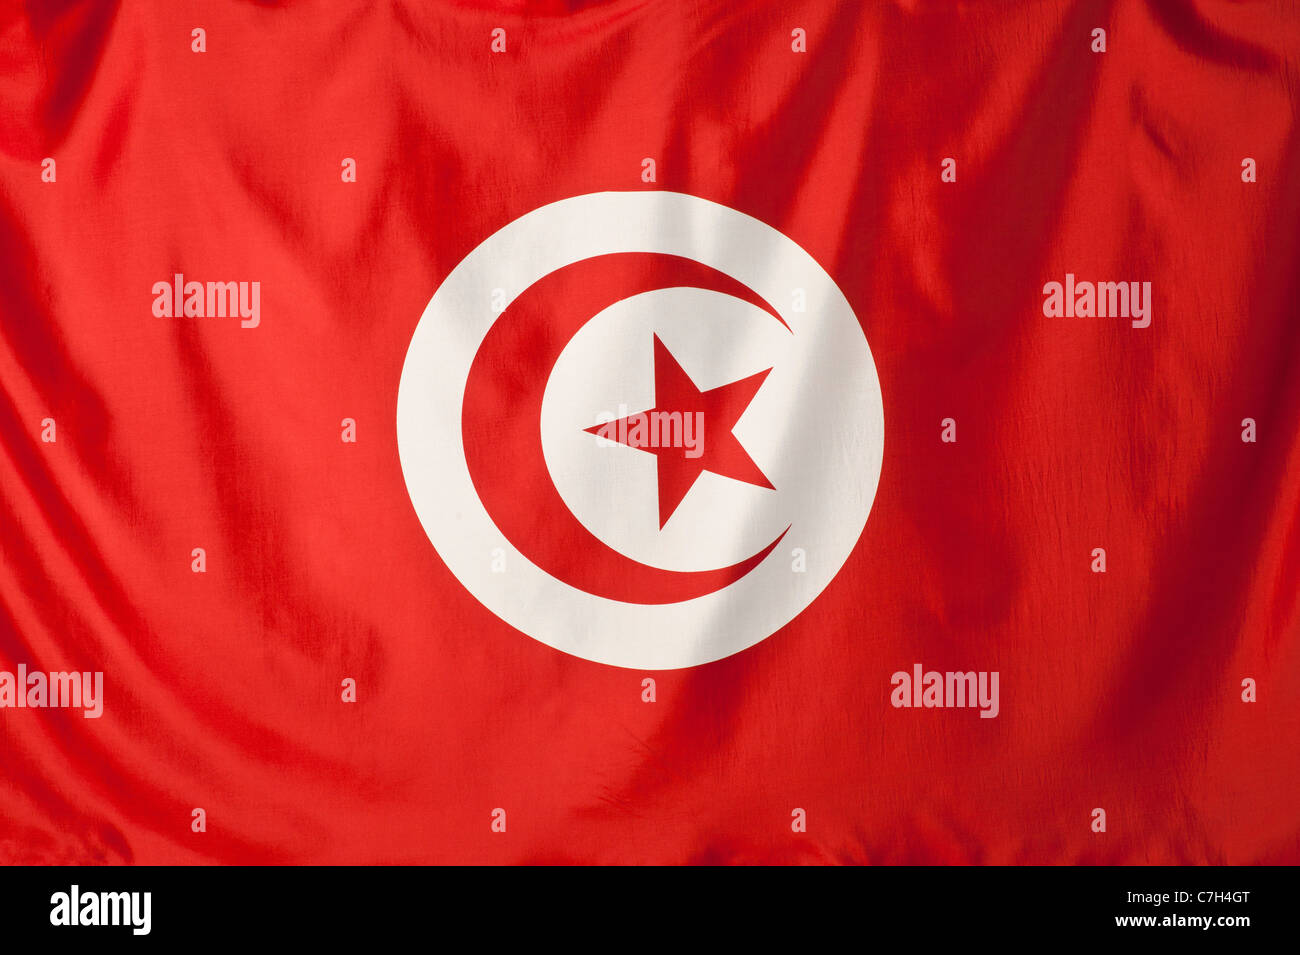 Tunisia flag, red crescent moon and red star shape in a white circle with a red background Stock Photo